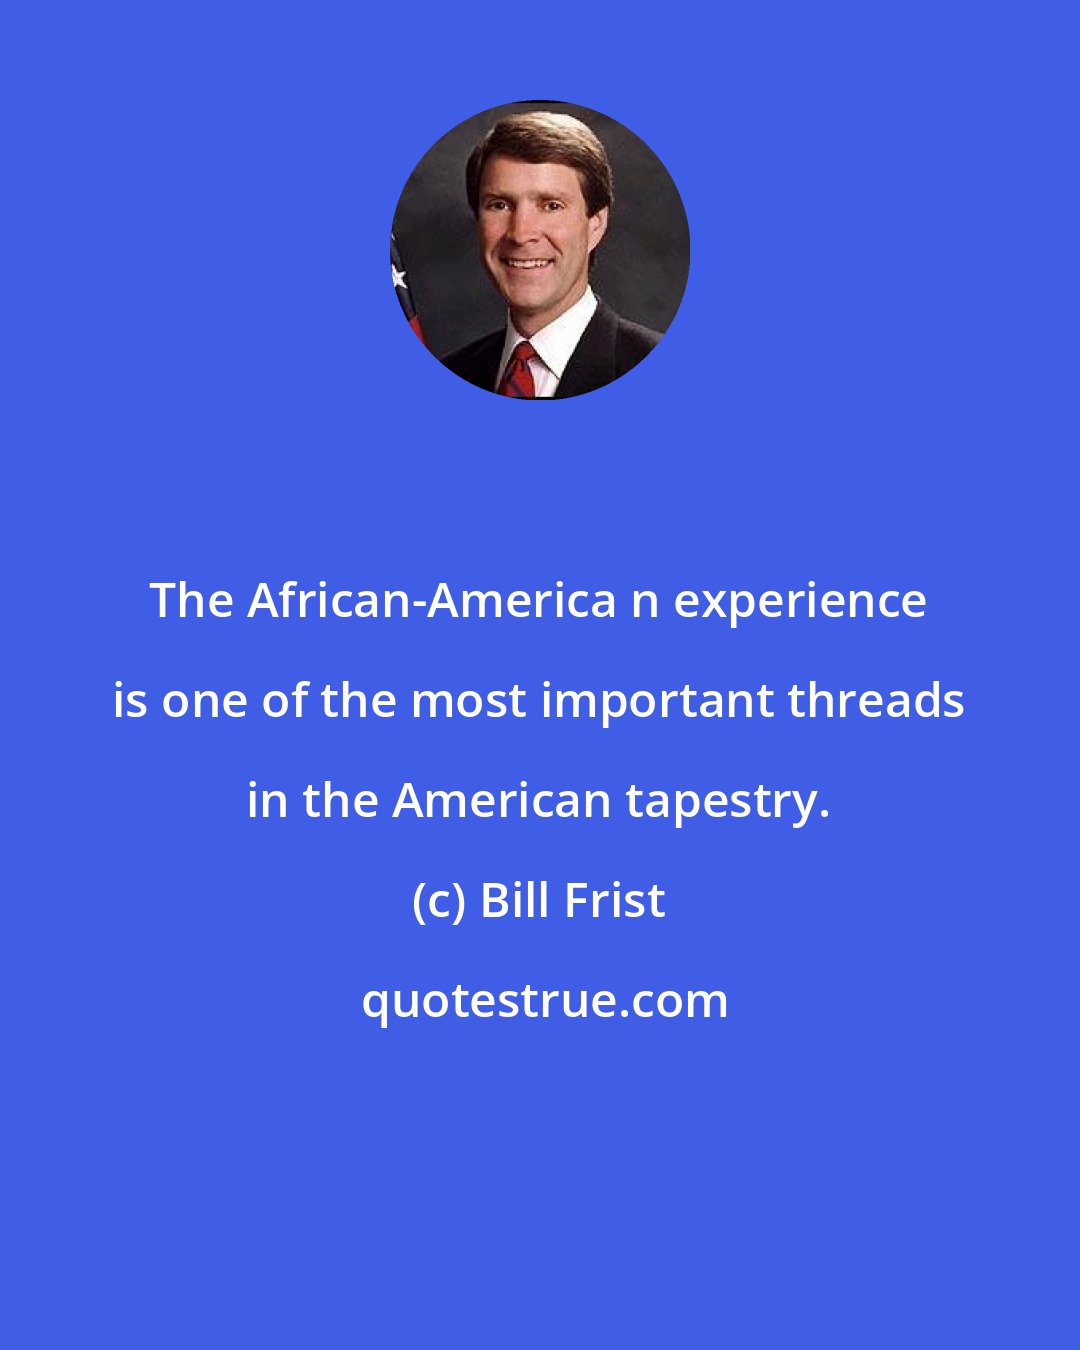 Bill Frist: The African-America n experience is one of the most important threads in the American tapestry.